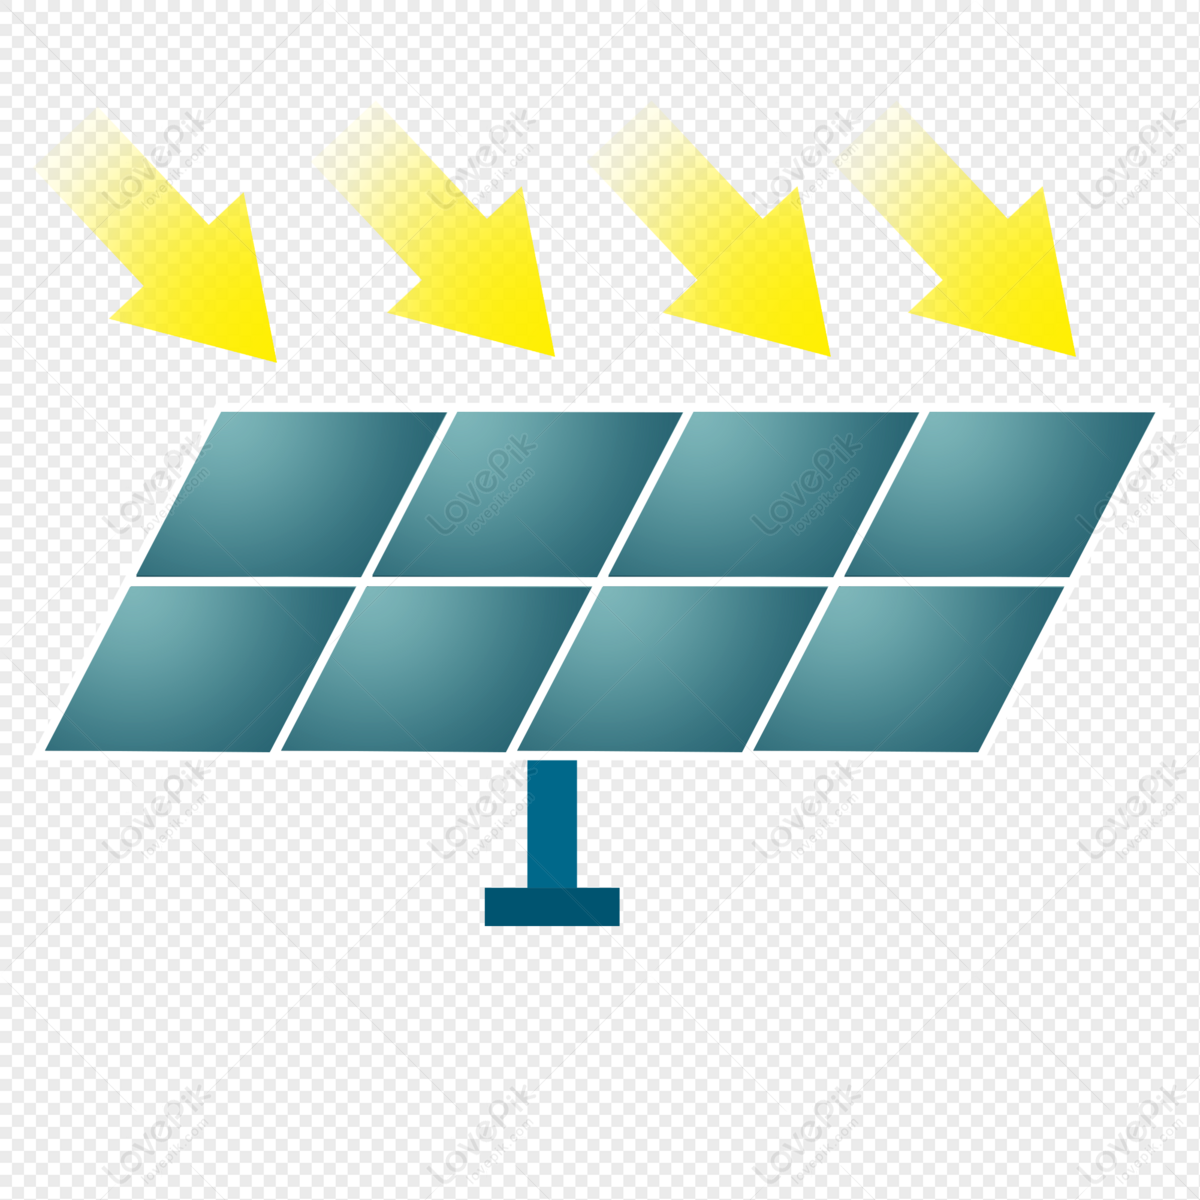 Cartoon Solar Panel PNG Image Free Download And Clipart Image For Free  Download - Lovepik | 401519291